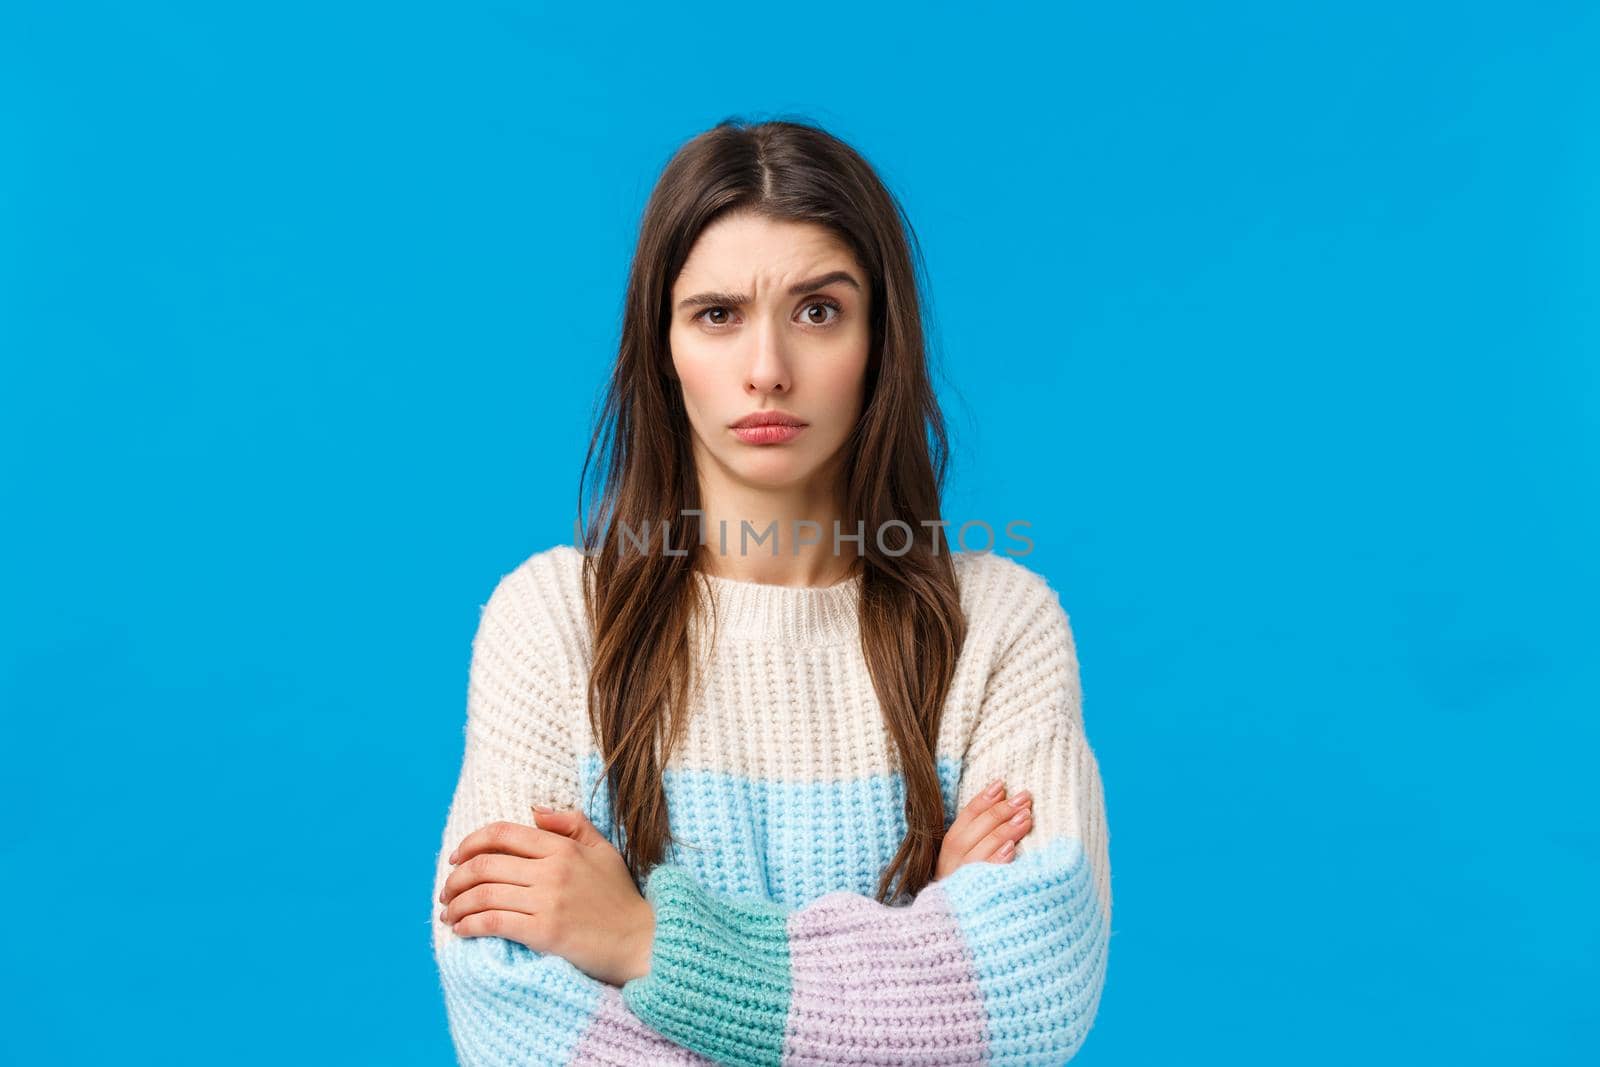 Skeptical, annoyed and displeased young woman hearing something stupid, nonsense, raise eyebrow suspicious and doubtful, cross hands over chest with disapproval, standing blue background.